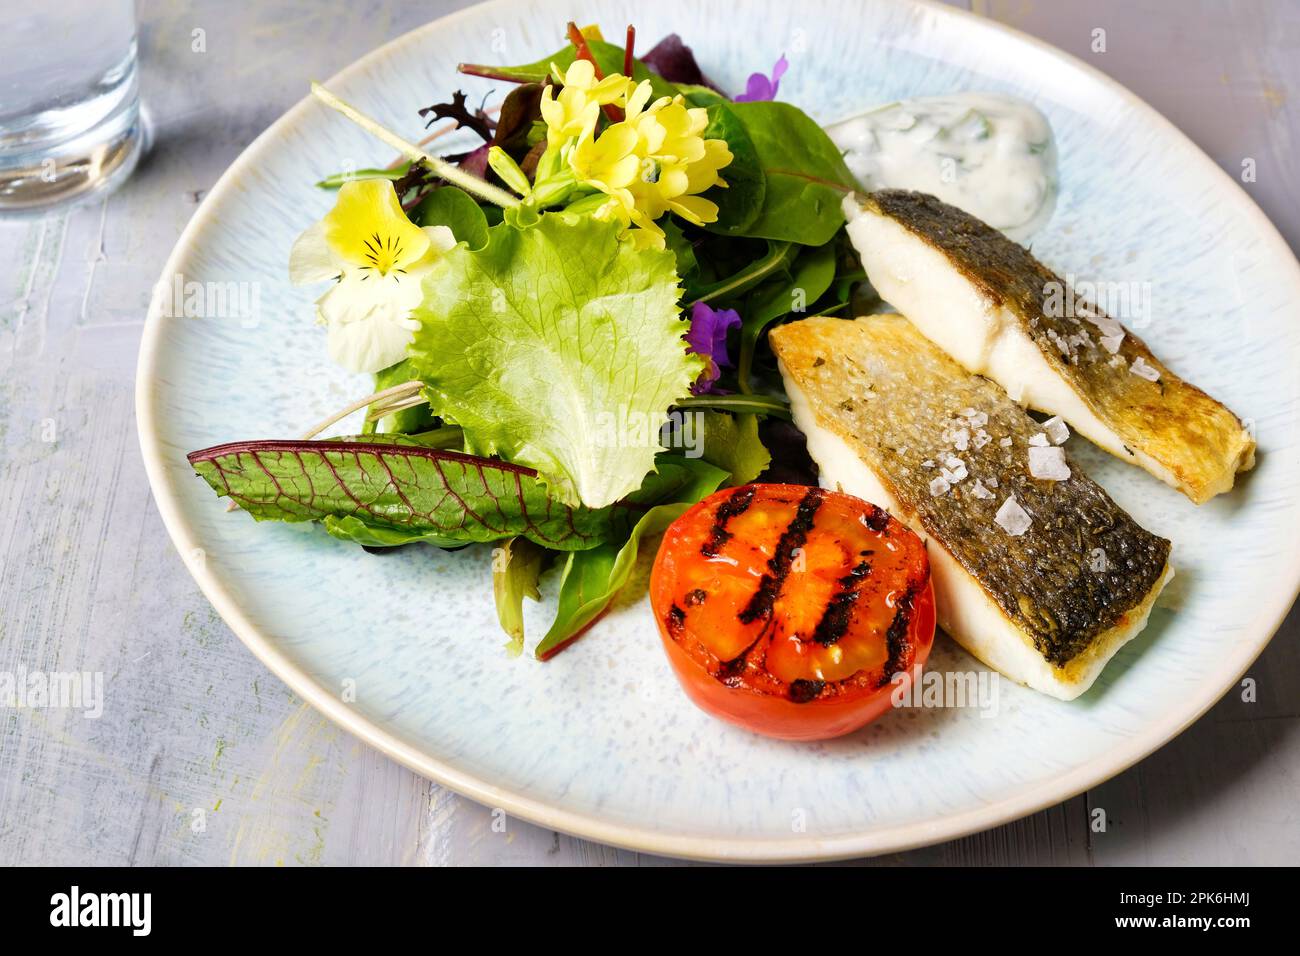 Sea bass with spring salad Stock Photo